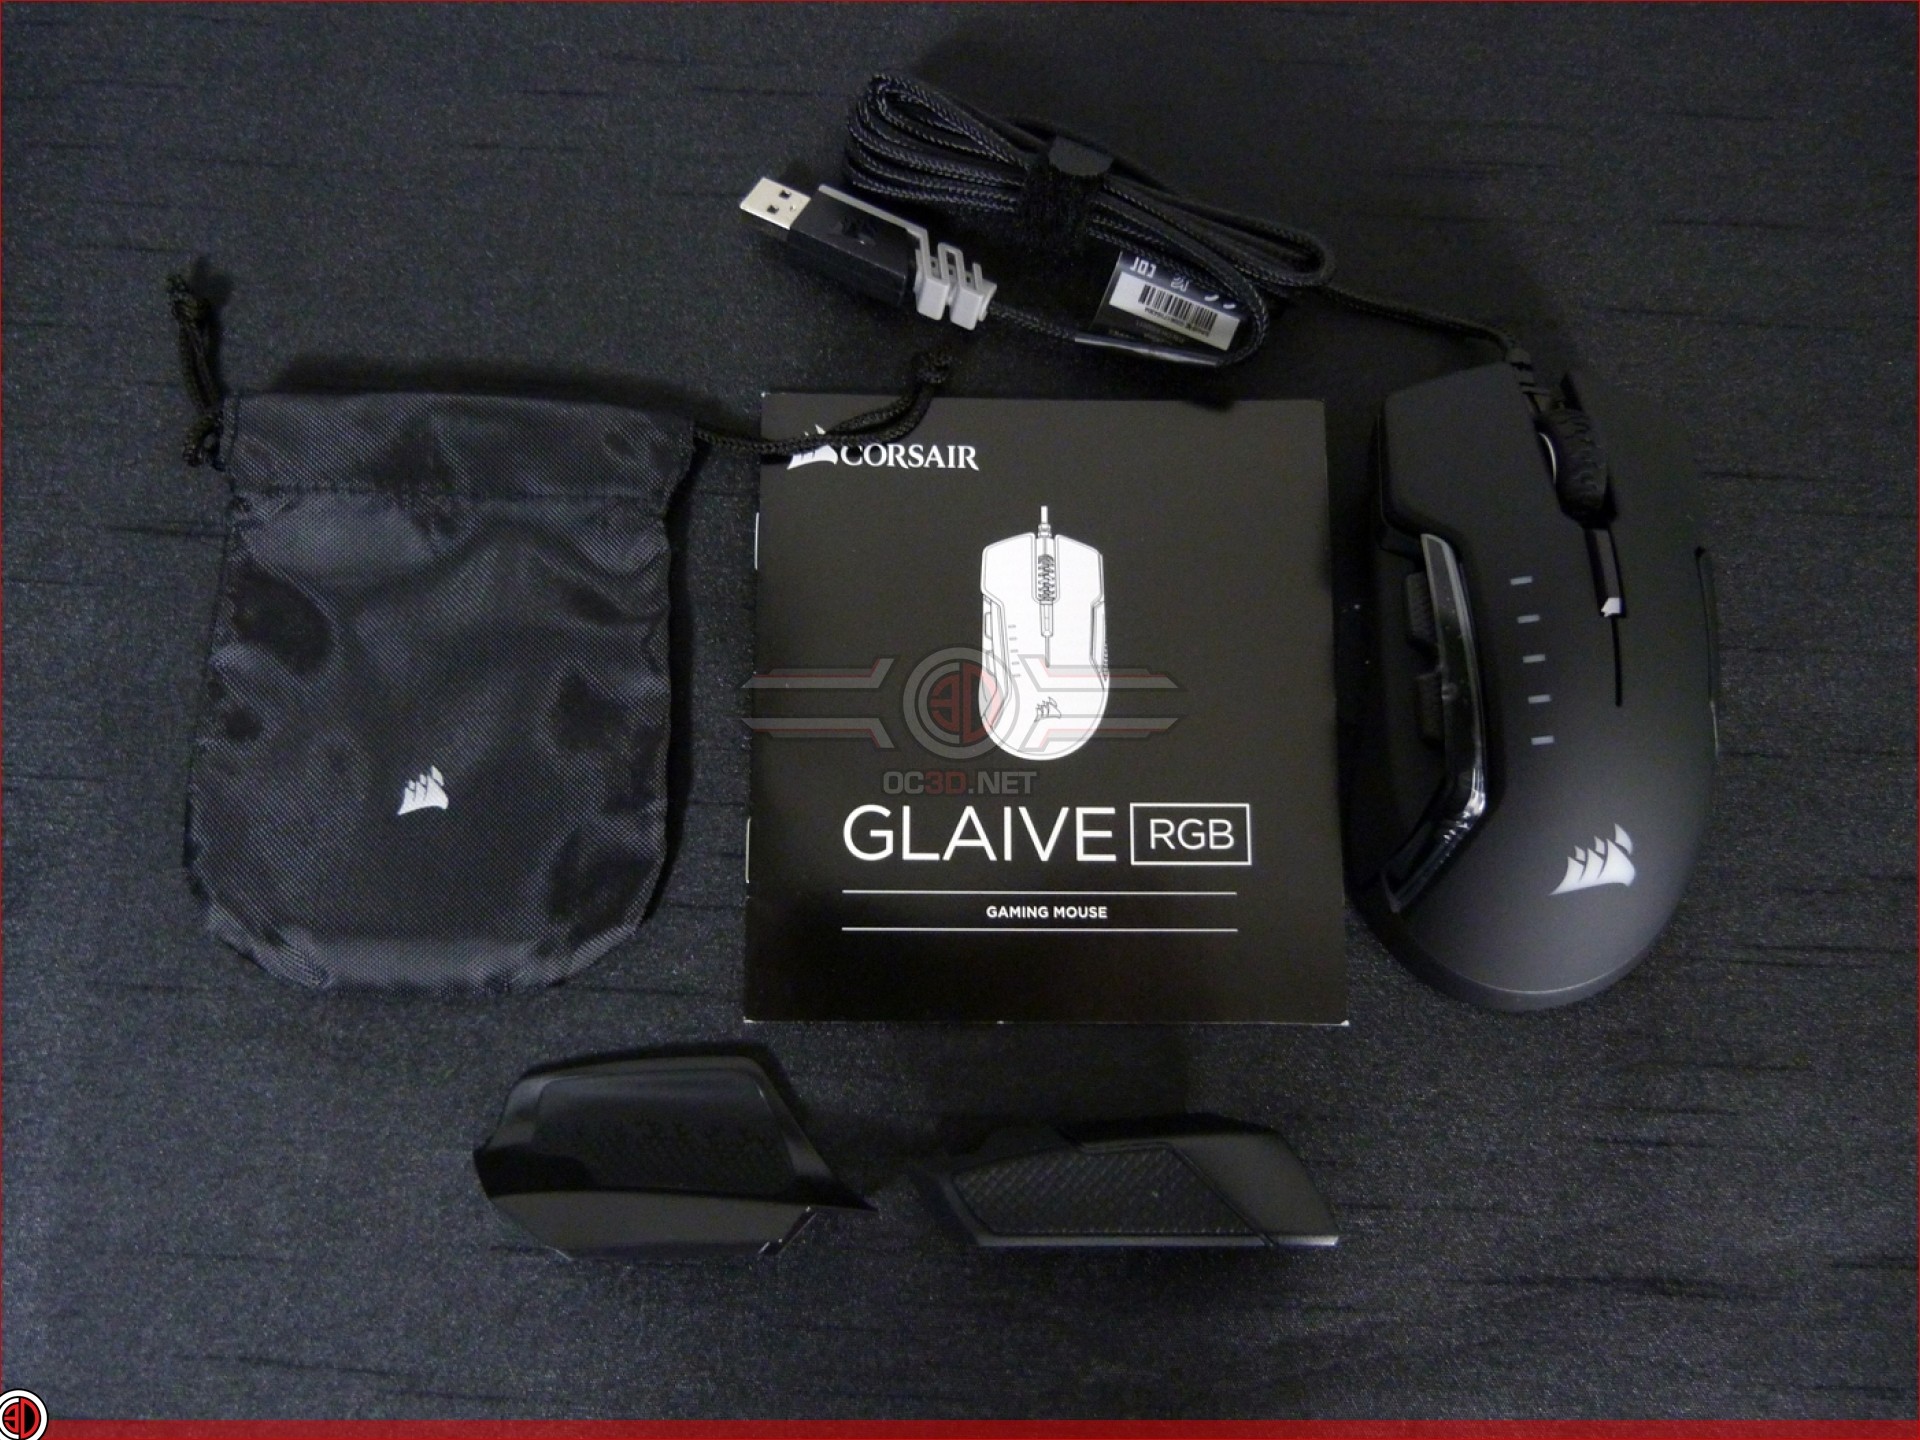 1920x1440 Corsair Glaive RGB Gaming Mouse Review